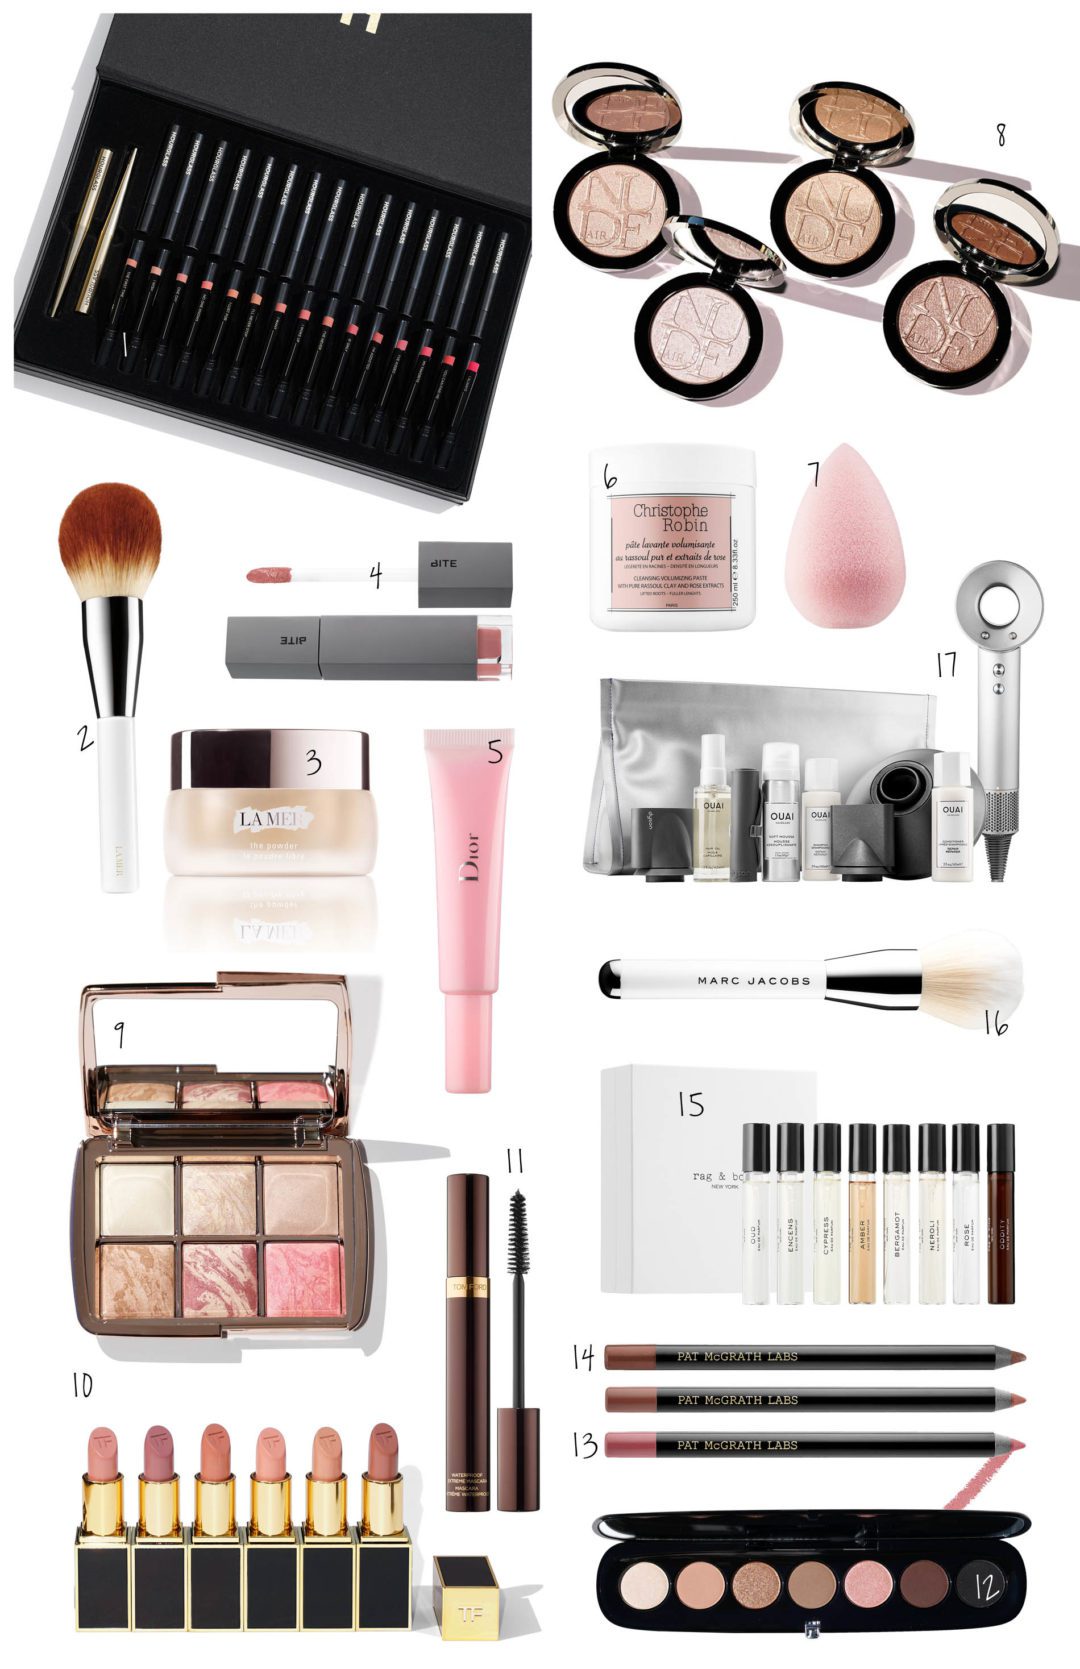 Sephora Beauty Insider 20 Off Rouge Sale Event